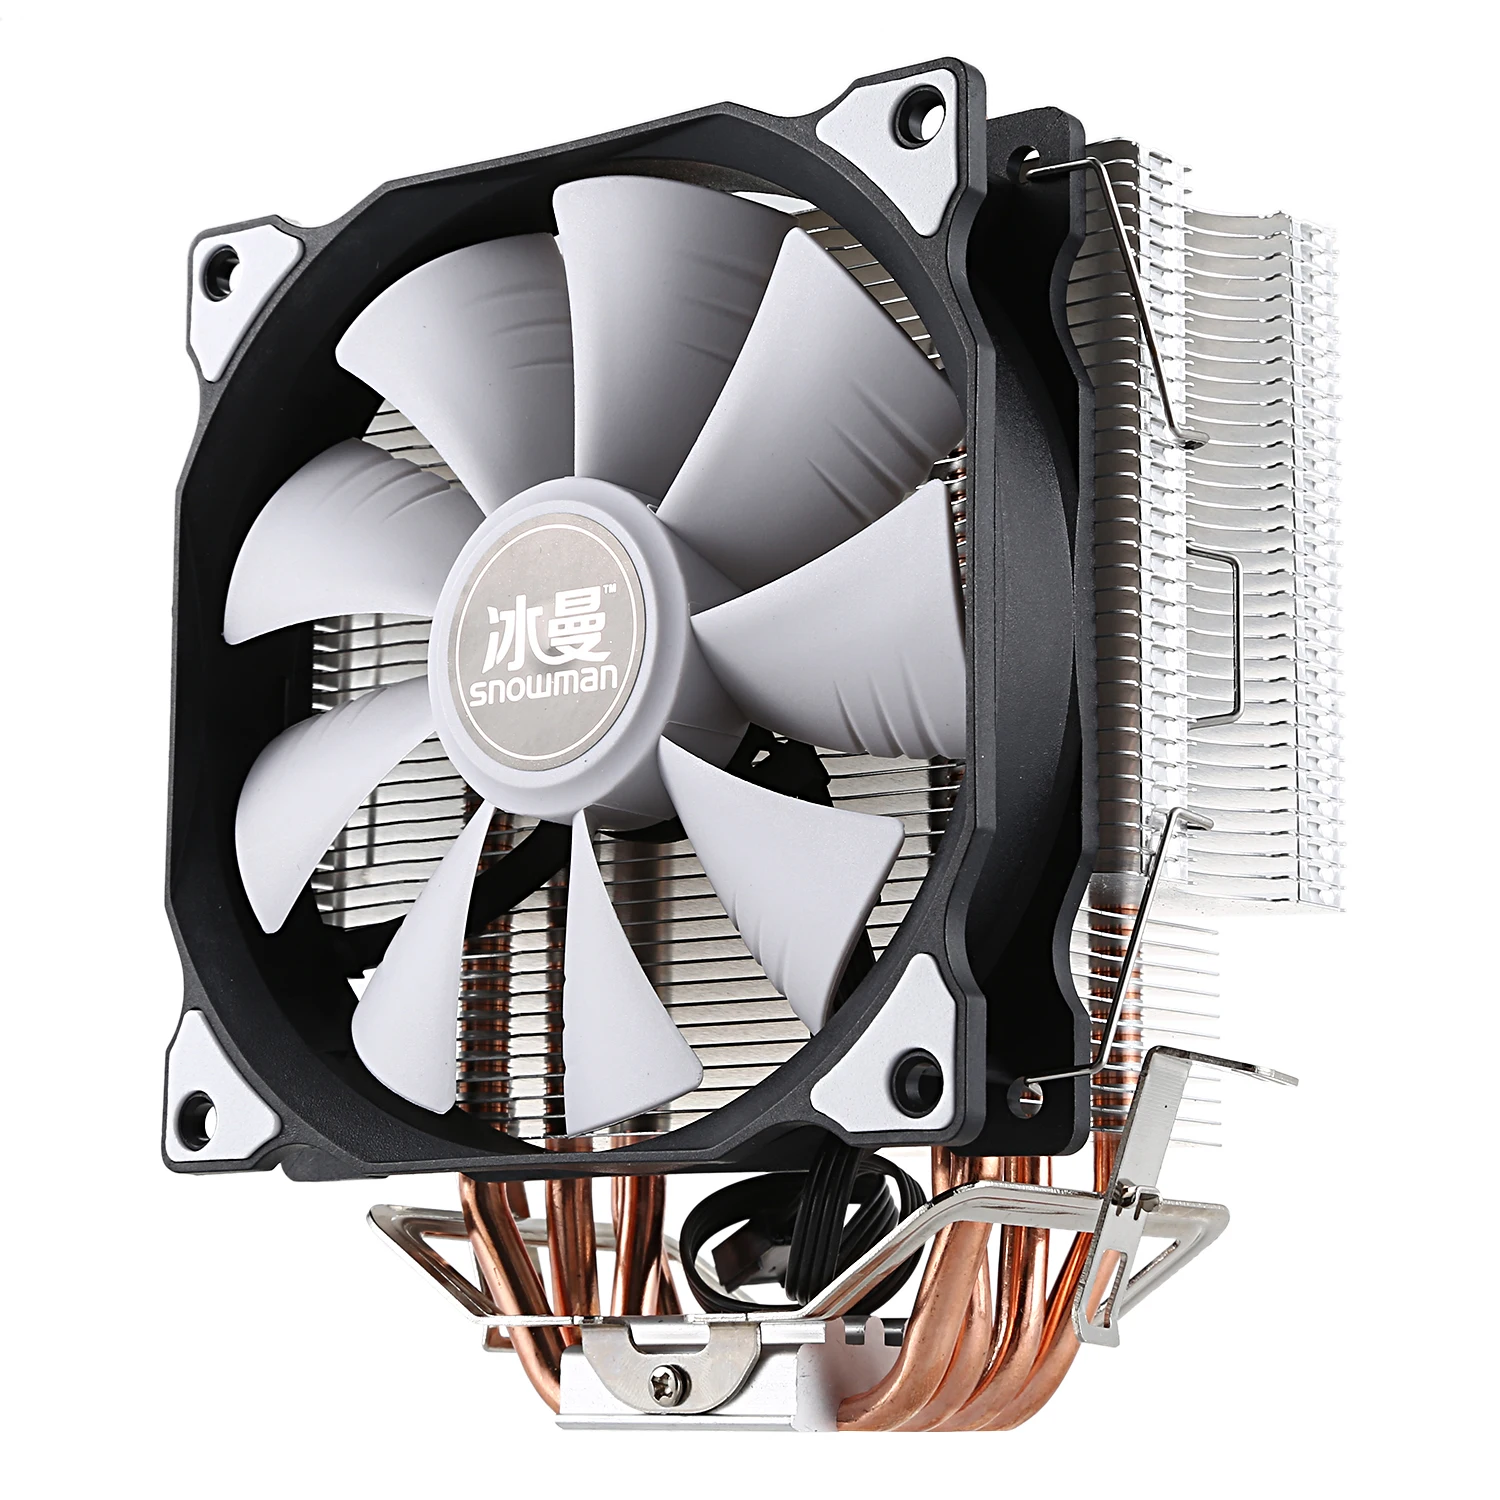 Cooler Master SNOWMAN CPU Cooler Master 5 Direct Contact Heatpipes freeze Tower Cooling S Z1T7 192948268489 